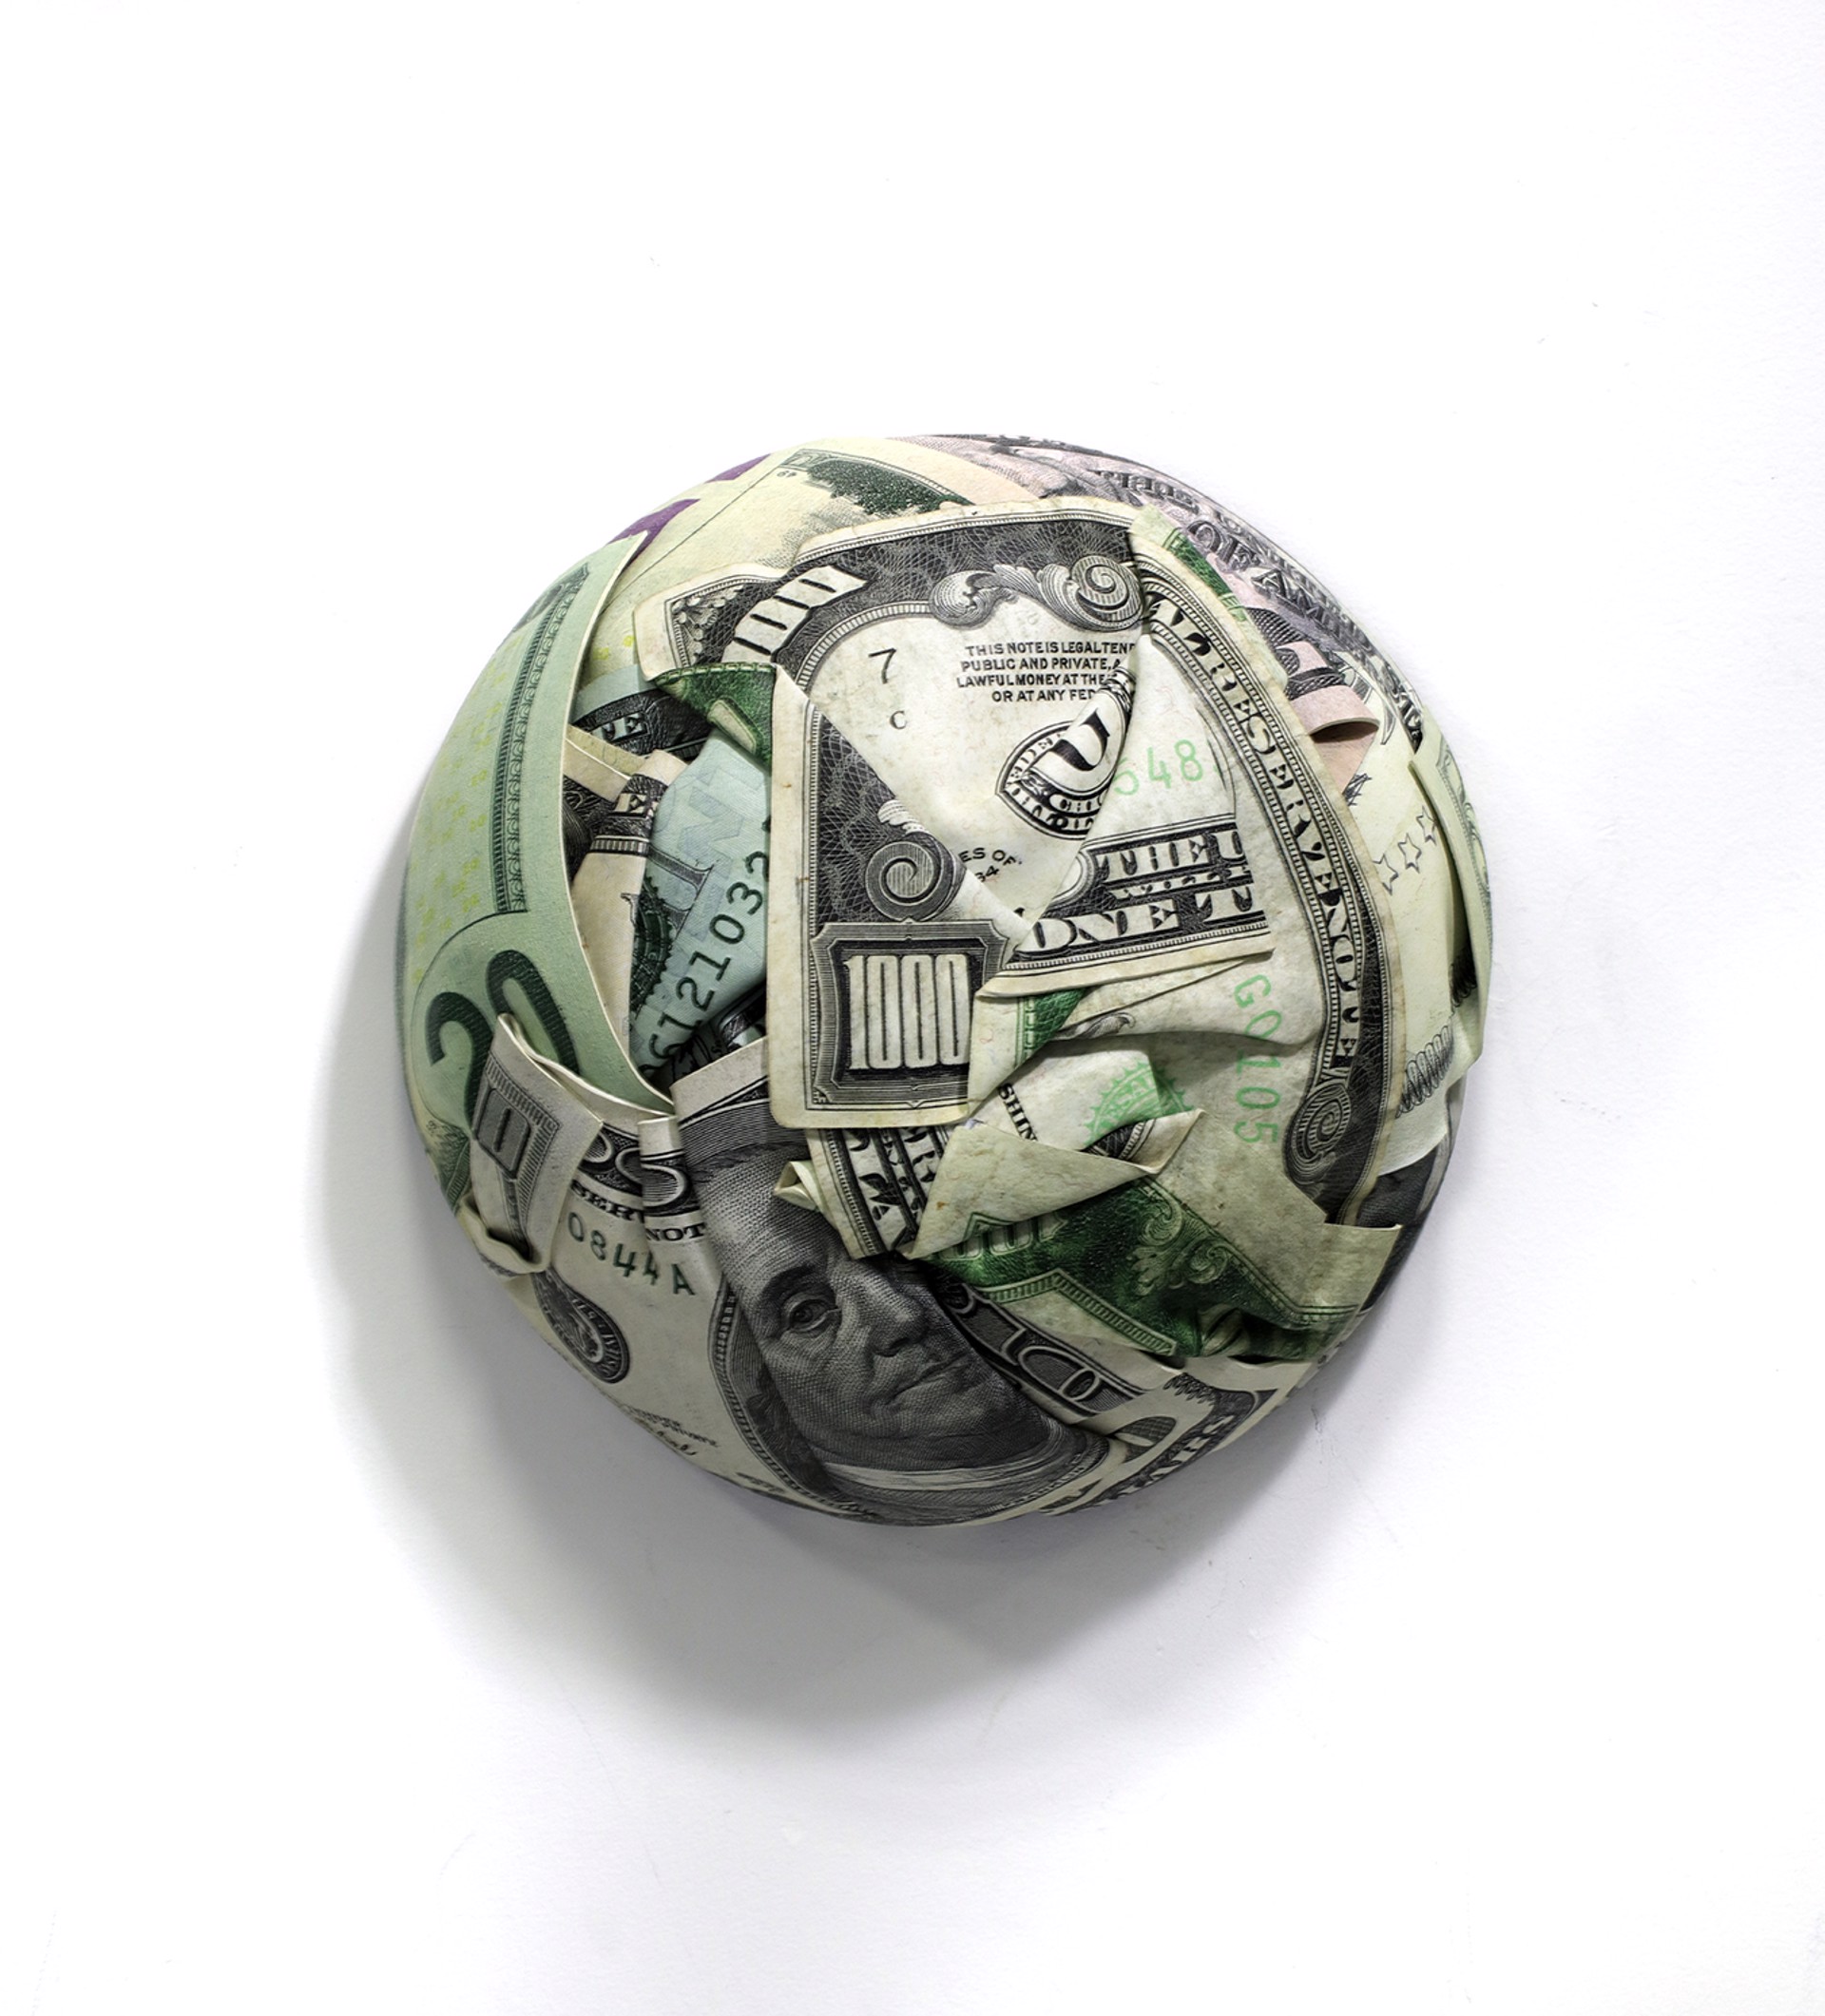 American Money by Paul Rousso